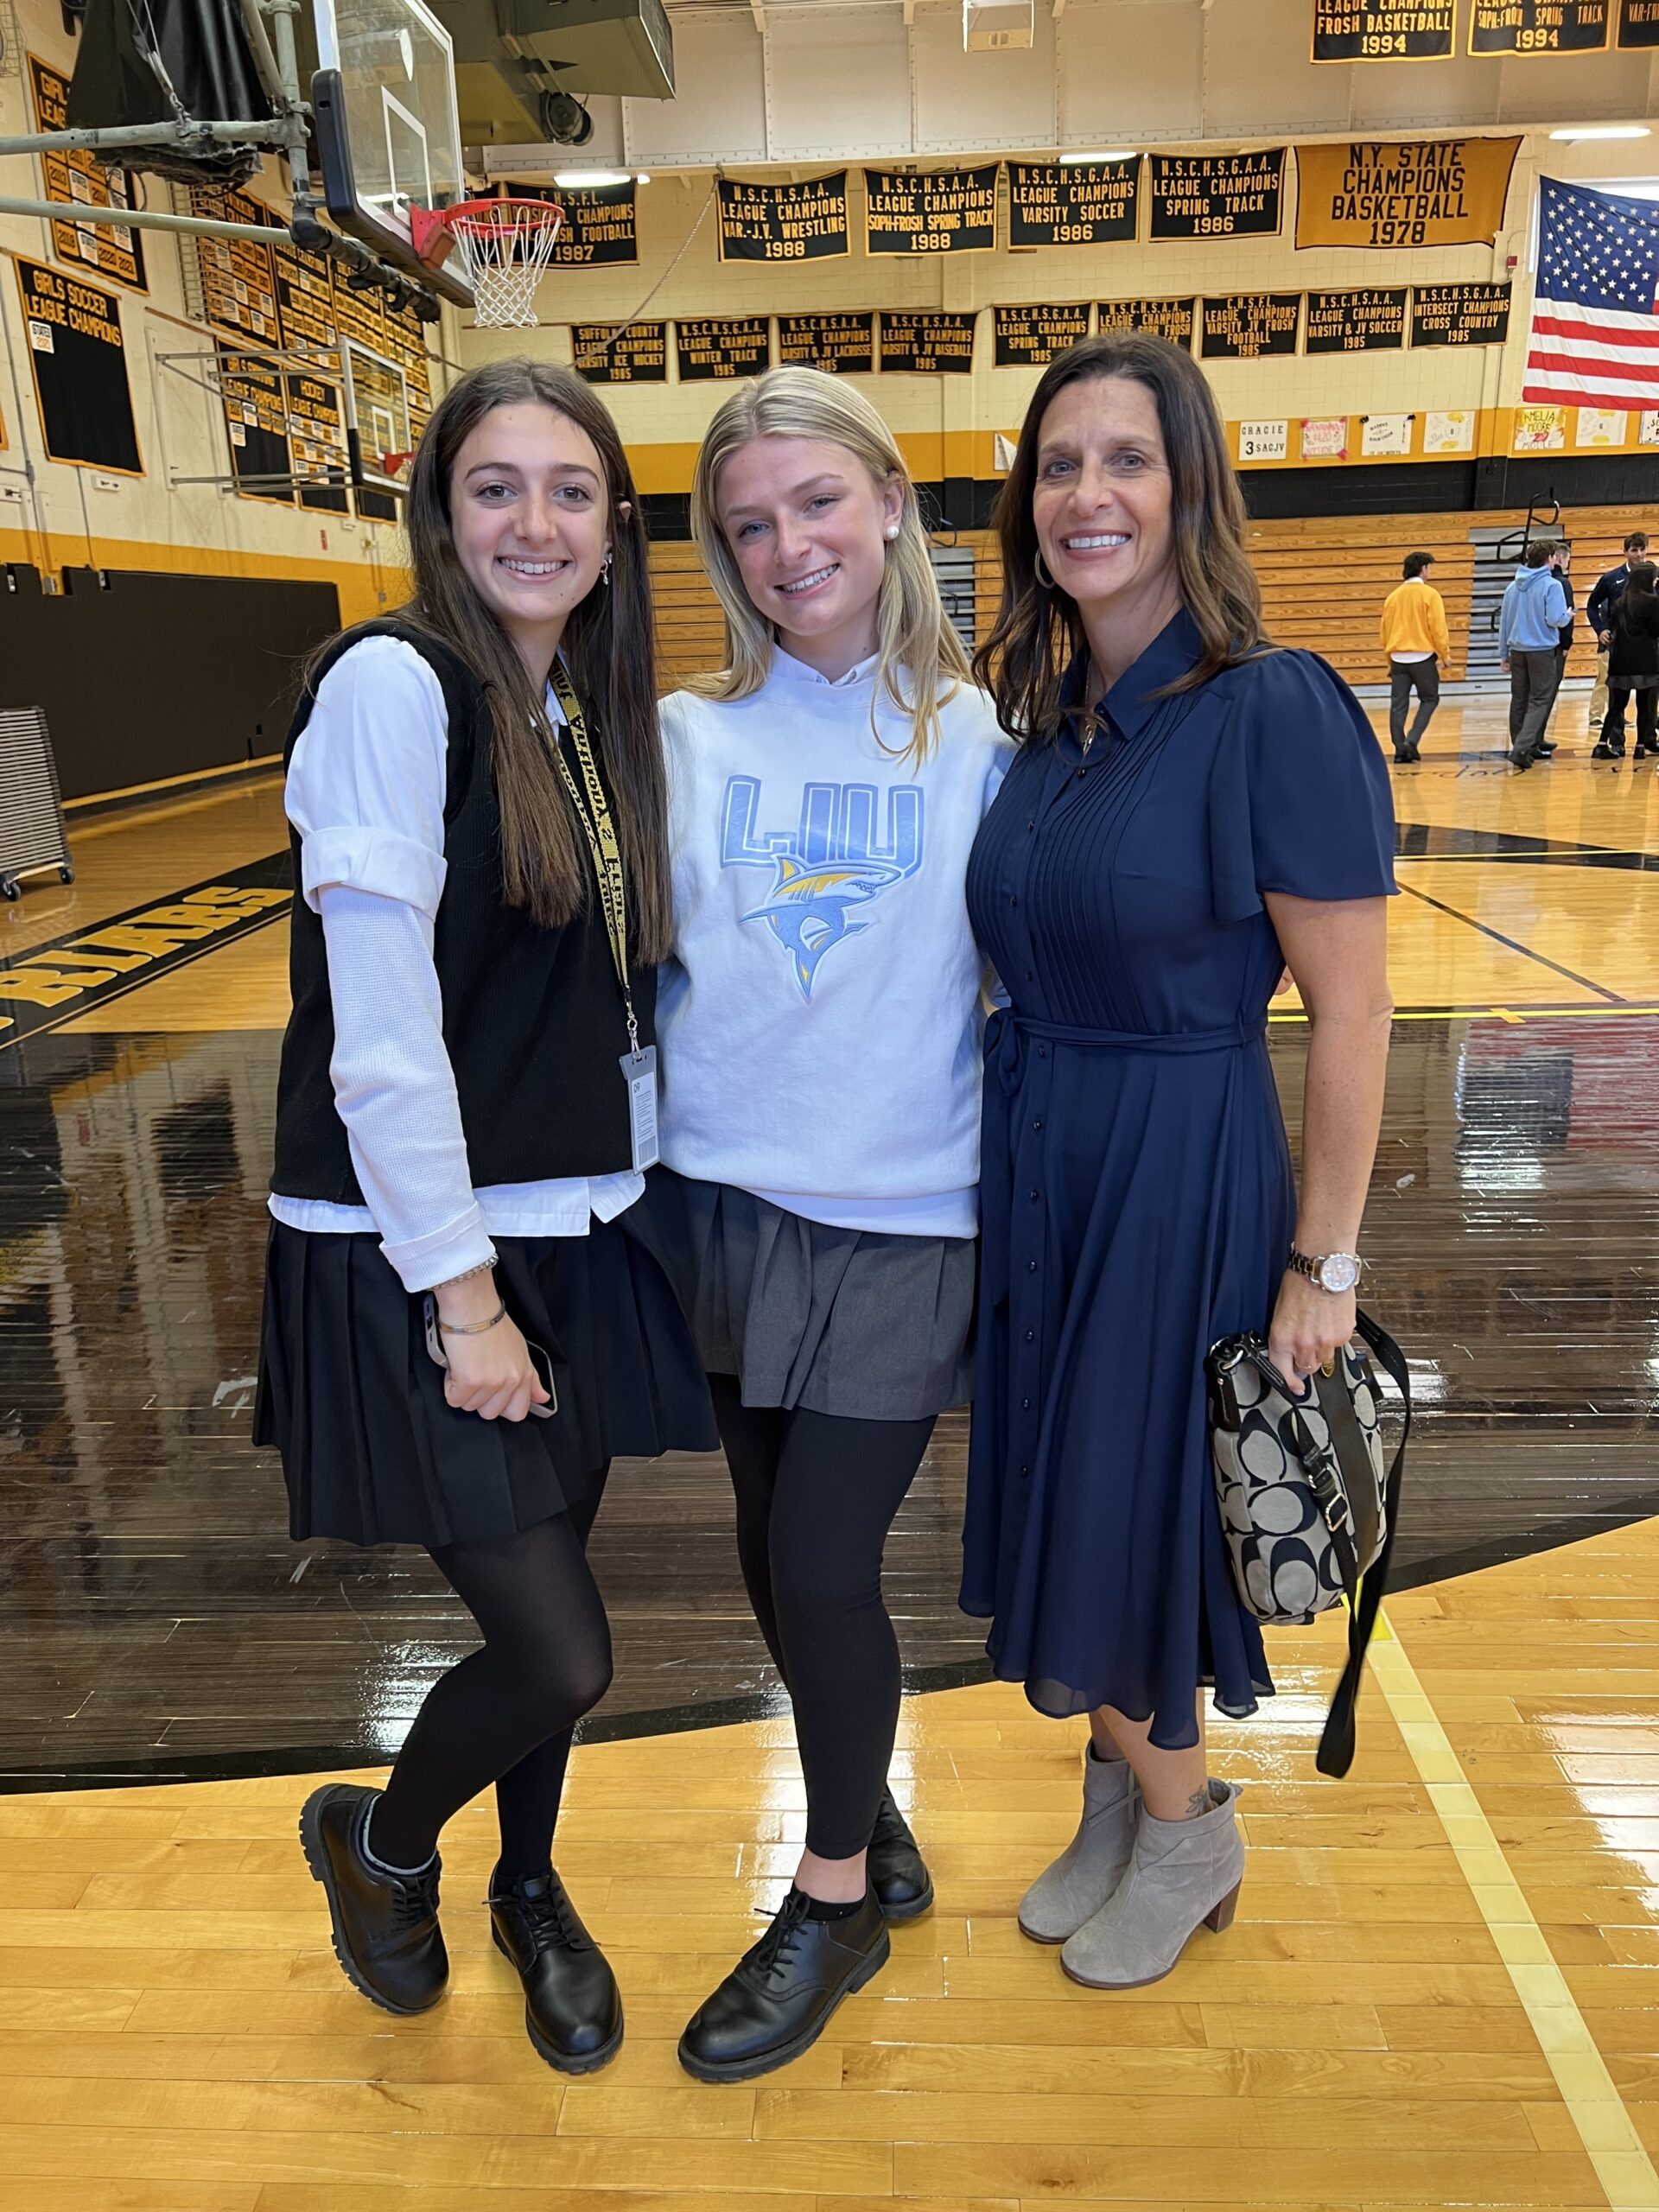 Sag Harbor resident Emma Rascelles, center, with her sister Aly and mother Beth Gualtieri.